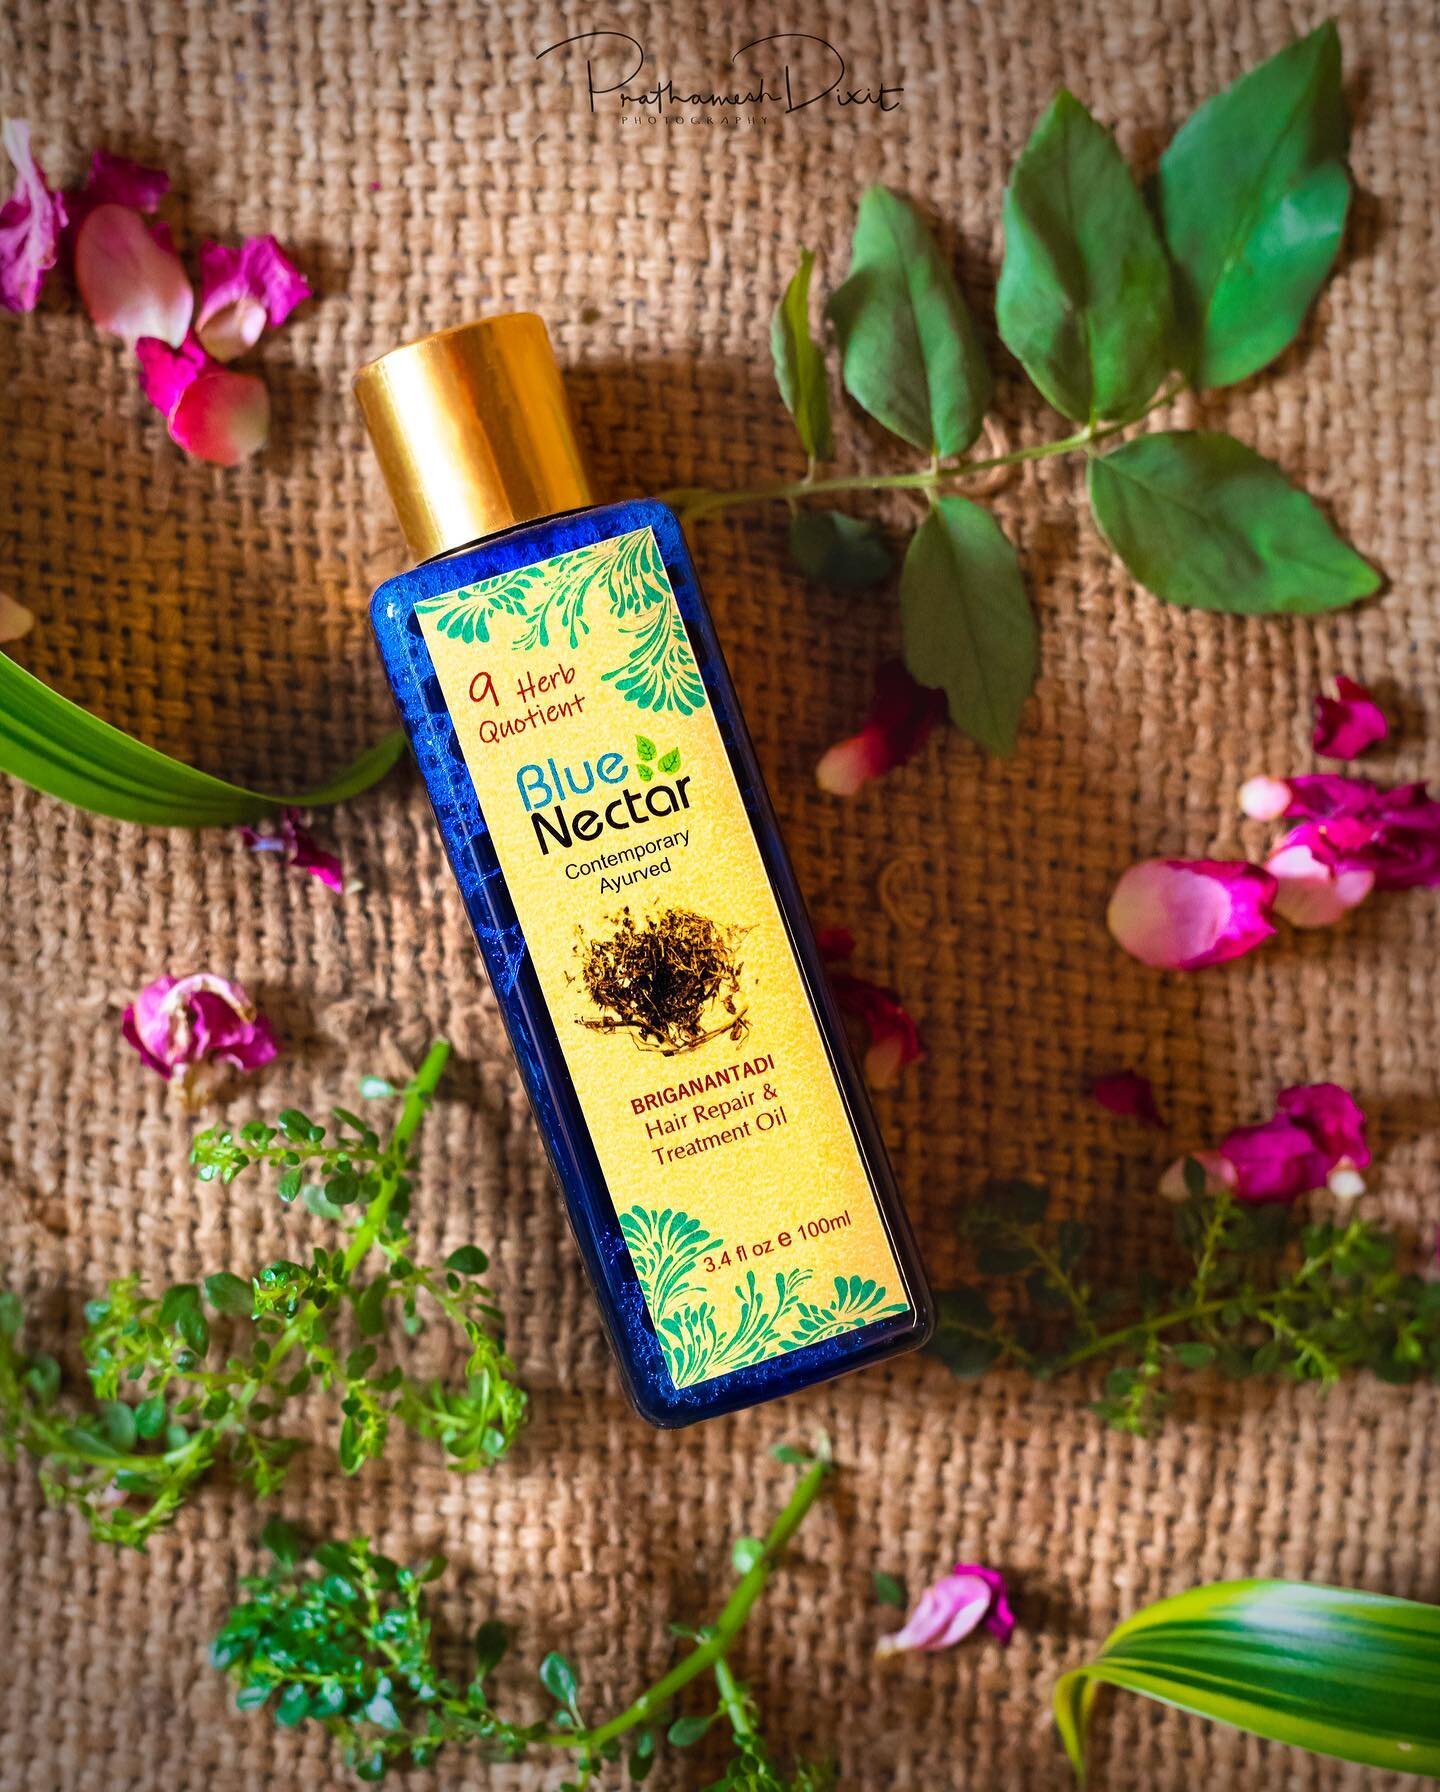 Just watch out for this amazing photograph from me and amazing product from @bluenectar_ayurveda 😉 
.
.
This is a mineral Oil free Ayurvedic Hair Oil with 9 Ayurvedic herbs like Bhringraj, Coconut, etc. 
.
.
As they say, It has excellent hair repair